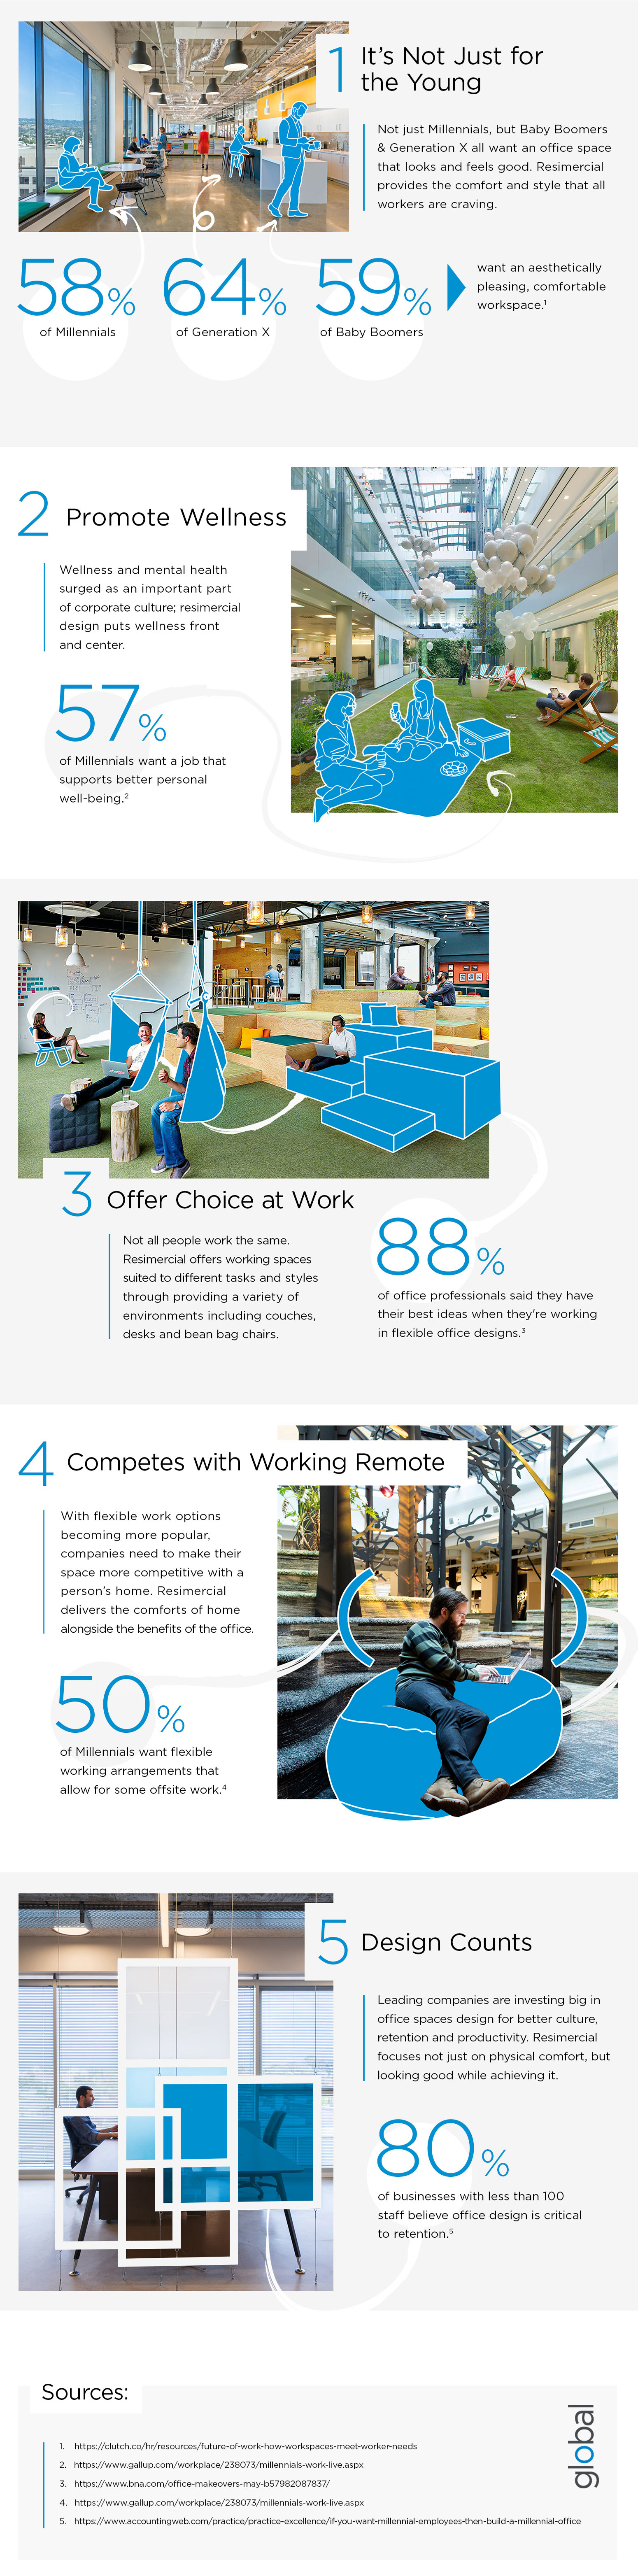 Resimercial (short for residential commercial) incorporates a home-like atmosphere into work, and it is quickly becoming the defining trend of 21st-century office design. Here are 5 reasons to consider it for your next office redesign: 1. Not Just for the Young. Not just Millennials, but Baby Boomers & Generation X all want an office space that looks and feels good. Resimercial provides the comfort and style that all workers are craving. 2. Promote Wellness. Wellness and mental health surged as an important part of corporate culture; resimercial designs spaces that put wellness front and center. 3. Offer Choice at Work. Not all people work the same. Resimercial offers working spaces suited to different tasks and styles through providing a variety of environments including couches, desks and bean bag chairs. 4. Compete with Working Remote. With flexible work options becoming more popular, companies need to make their space more competitive with a person’s home. Resimercial delivers the comforts of home alongside the benefits of the office. 5. Design Counts. Leading companies are investing big in office spaces design for better culture, retention and productivity. Resimercial focuses not just on physical comfort, but looking good while achieving it.